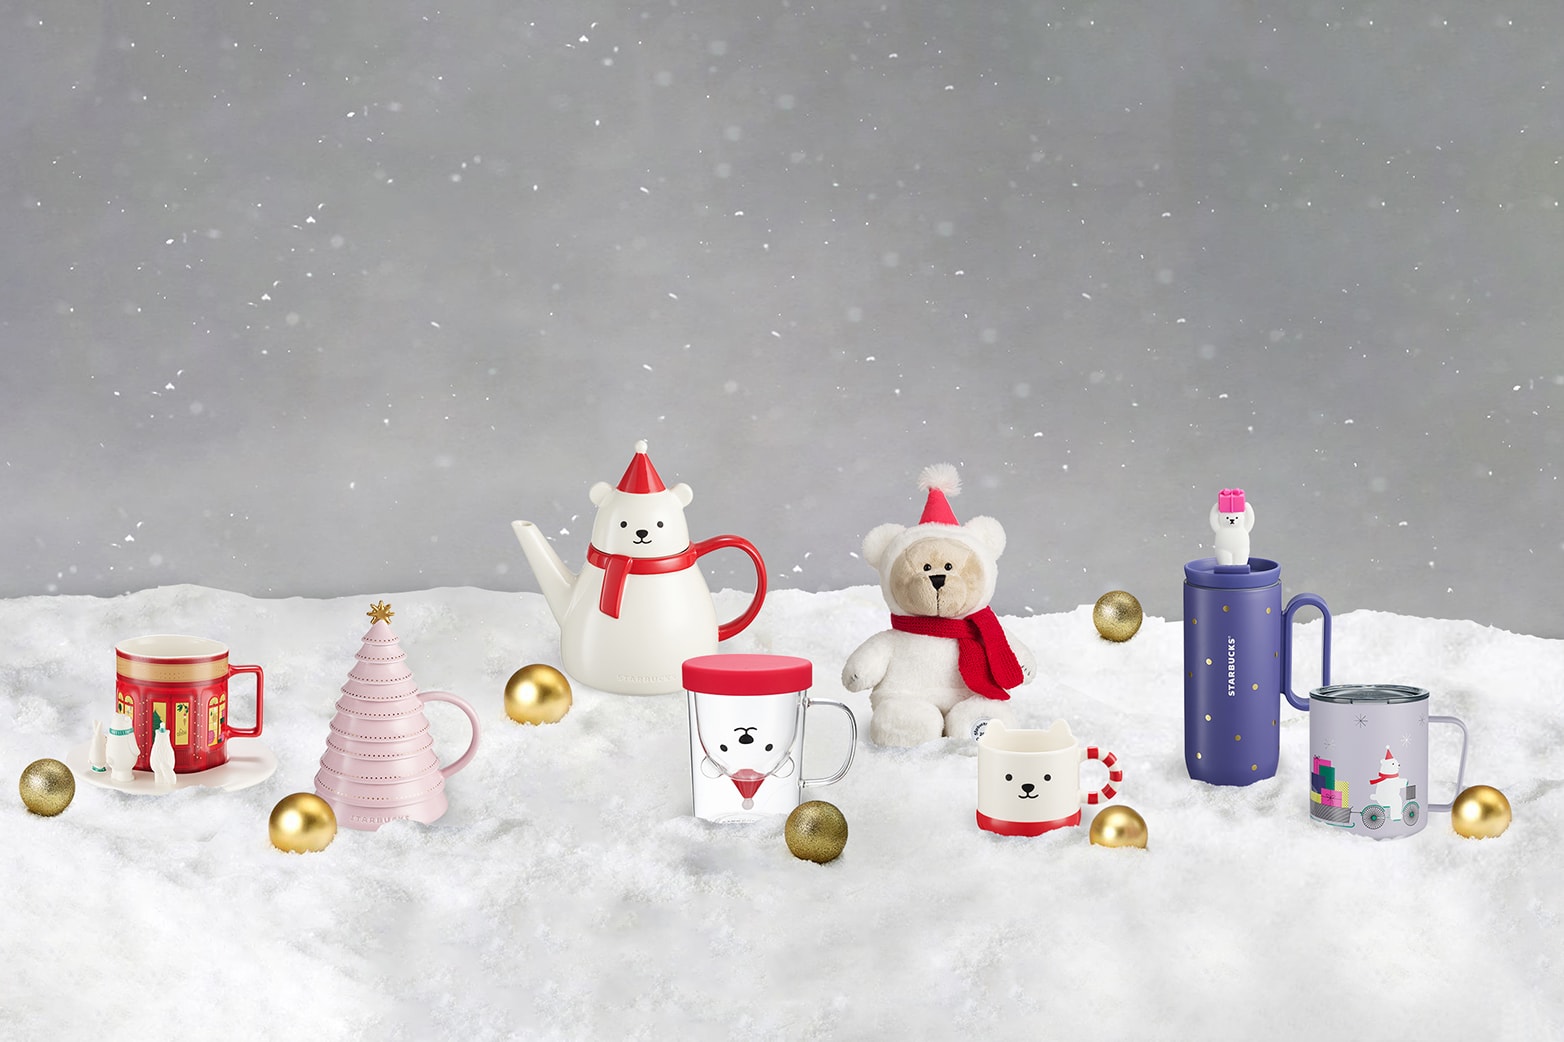 https://image-cdn.hypb.st/https%3A%2F%2Fhypebeast.com%2Fwp-content%2Fblogs.dir%2F6%2Ffiles%2F2021%2F11%2Fstarbucks-happy-holidays-collection-coffee-mugs-tumblers-brew-cover-release-hong-kong-2.jpg?cbr=1&q=90